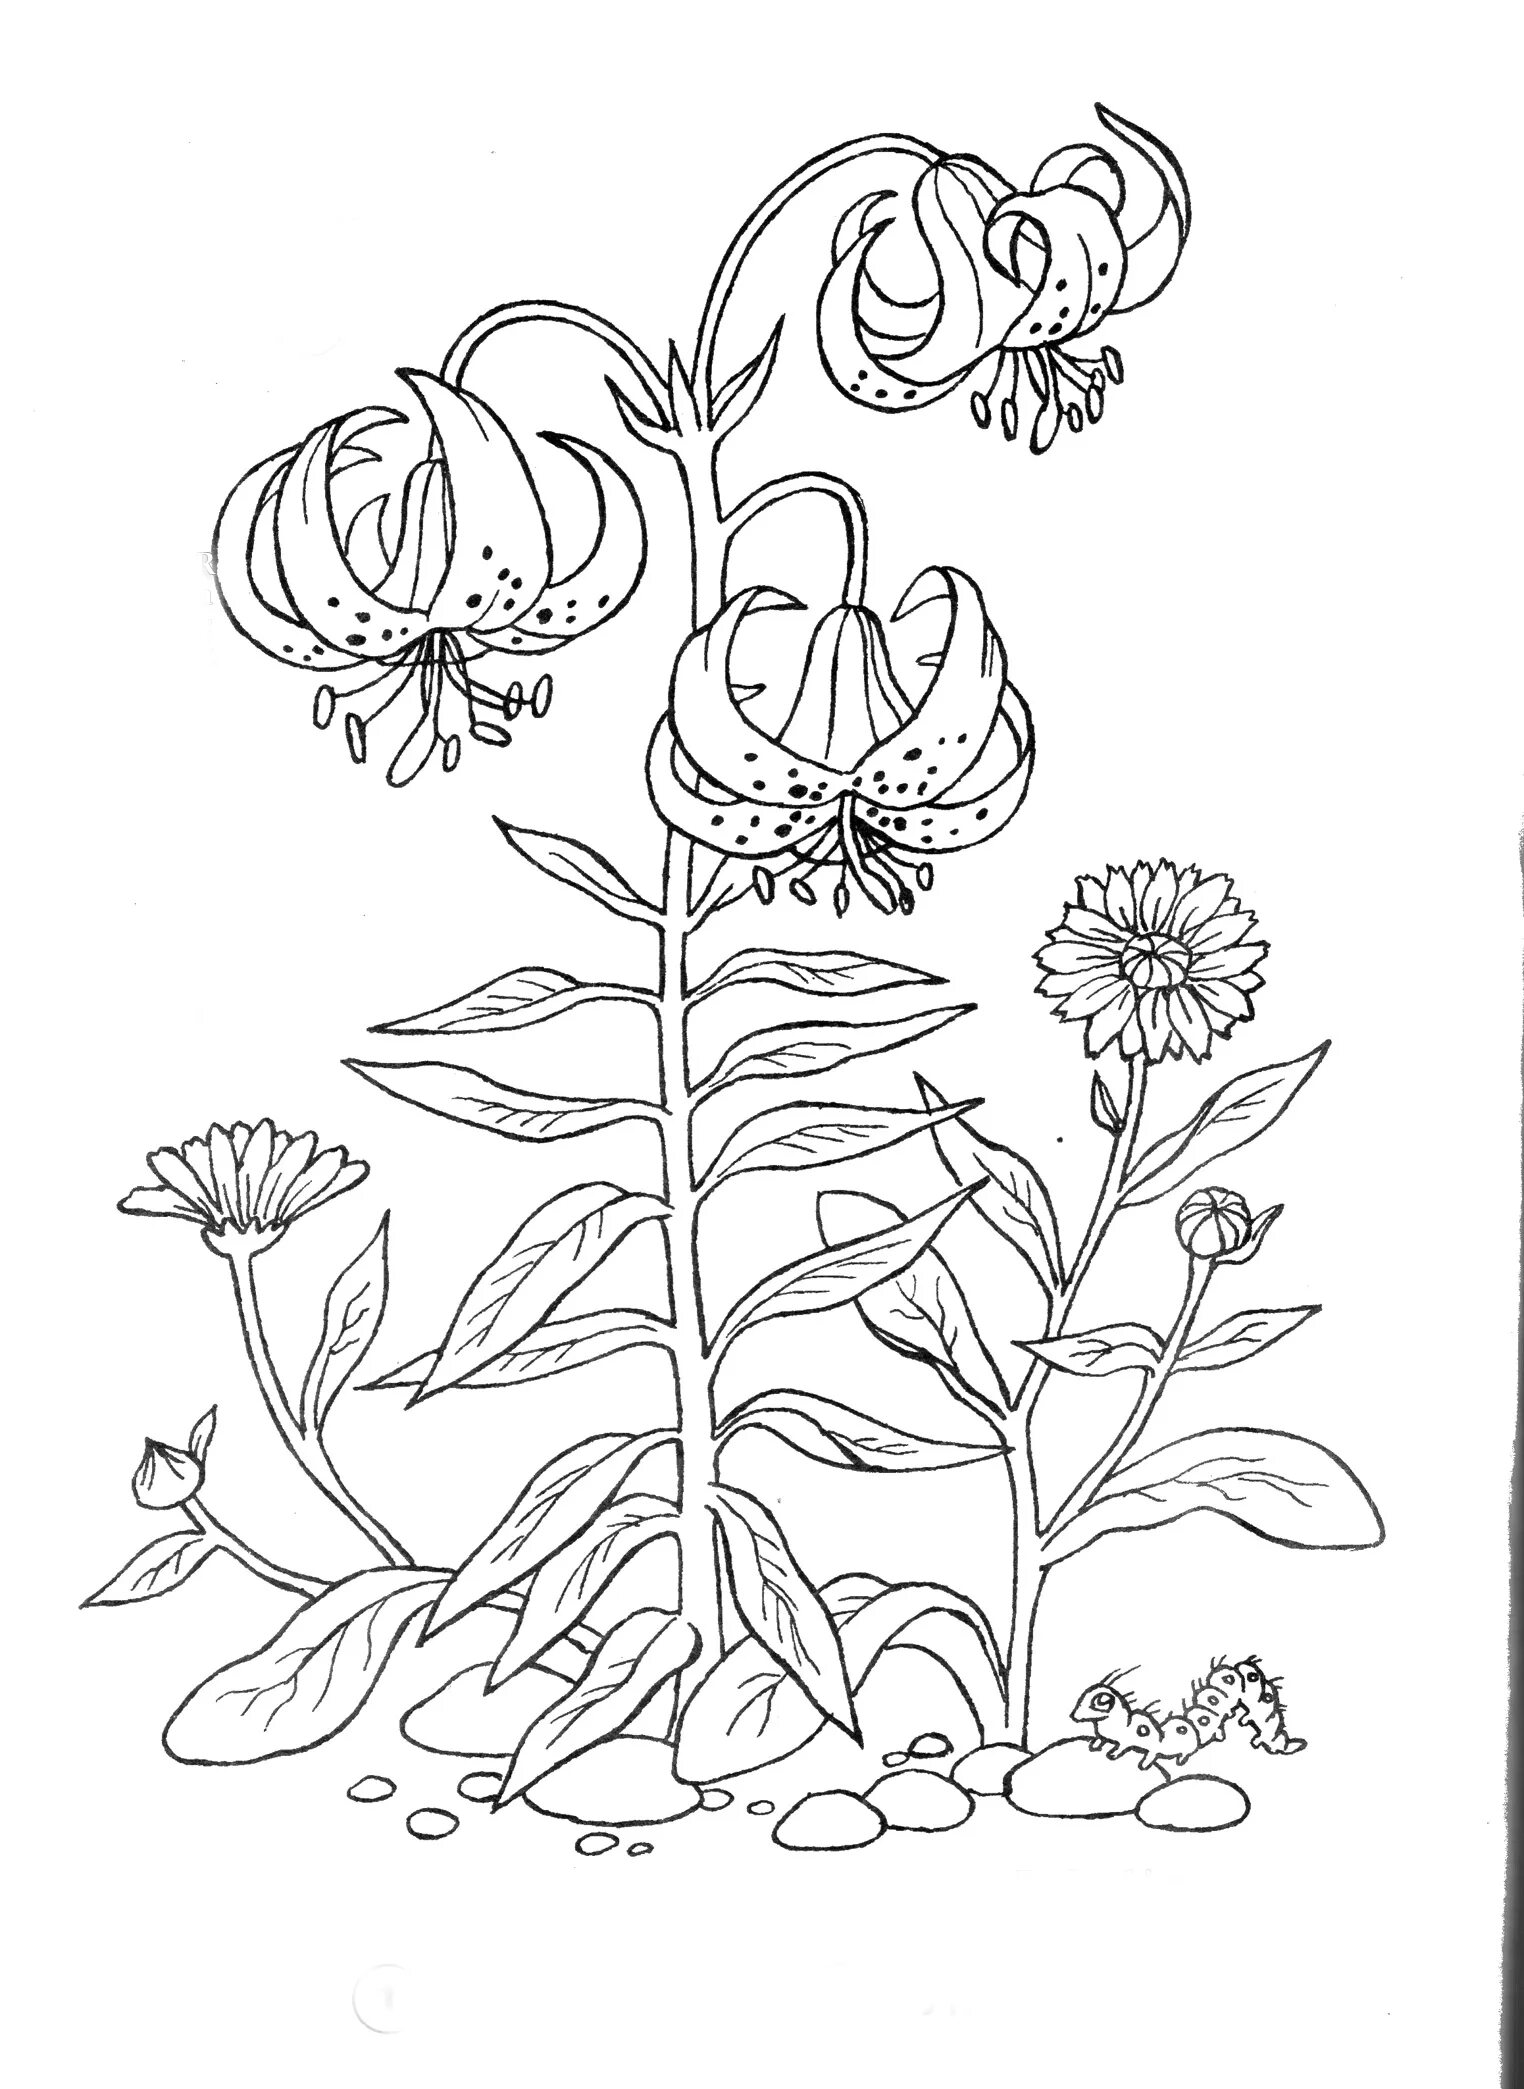 Fun coloring pages with medicinal plants for preschoolers